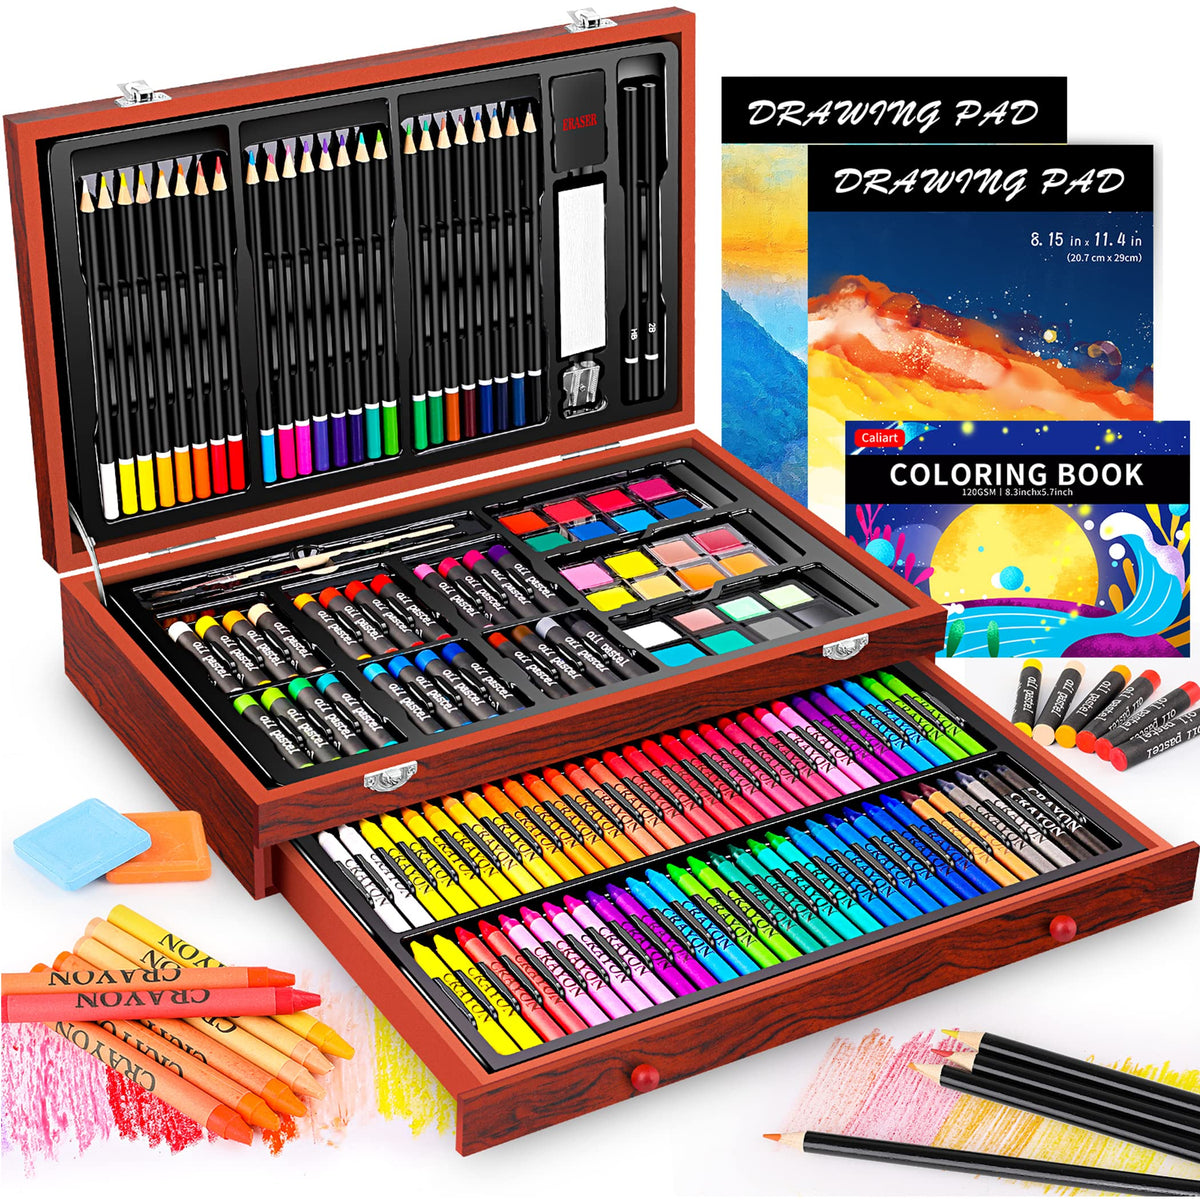 Art Kits for Kids, KINSPORY 139 Pack Art Supplies Case Painting